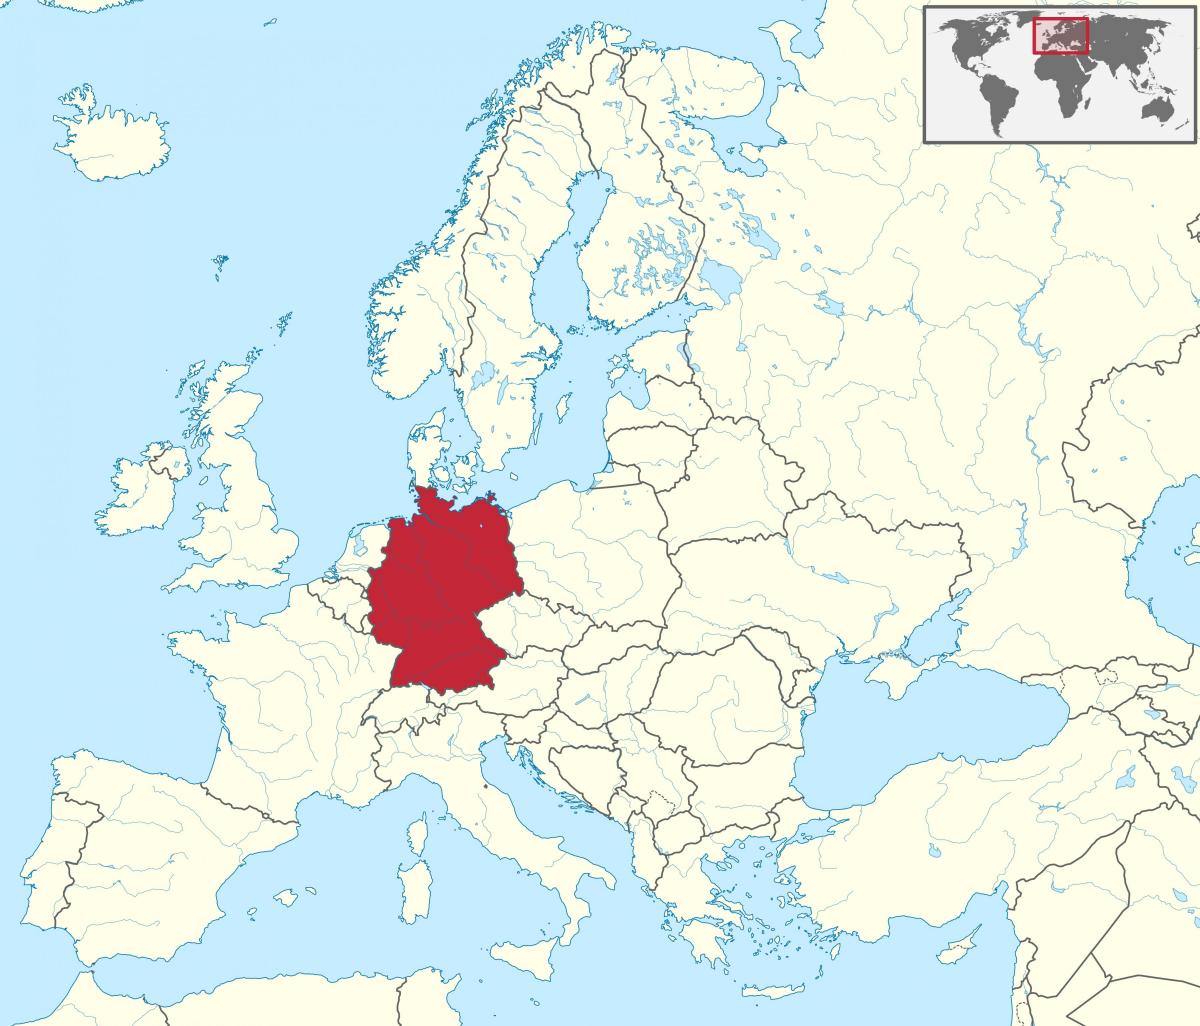 Germany location on the Europe map